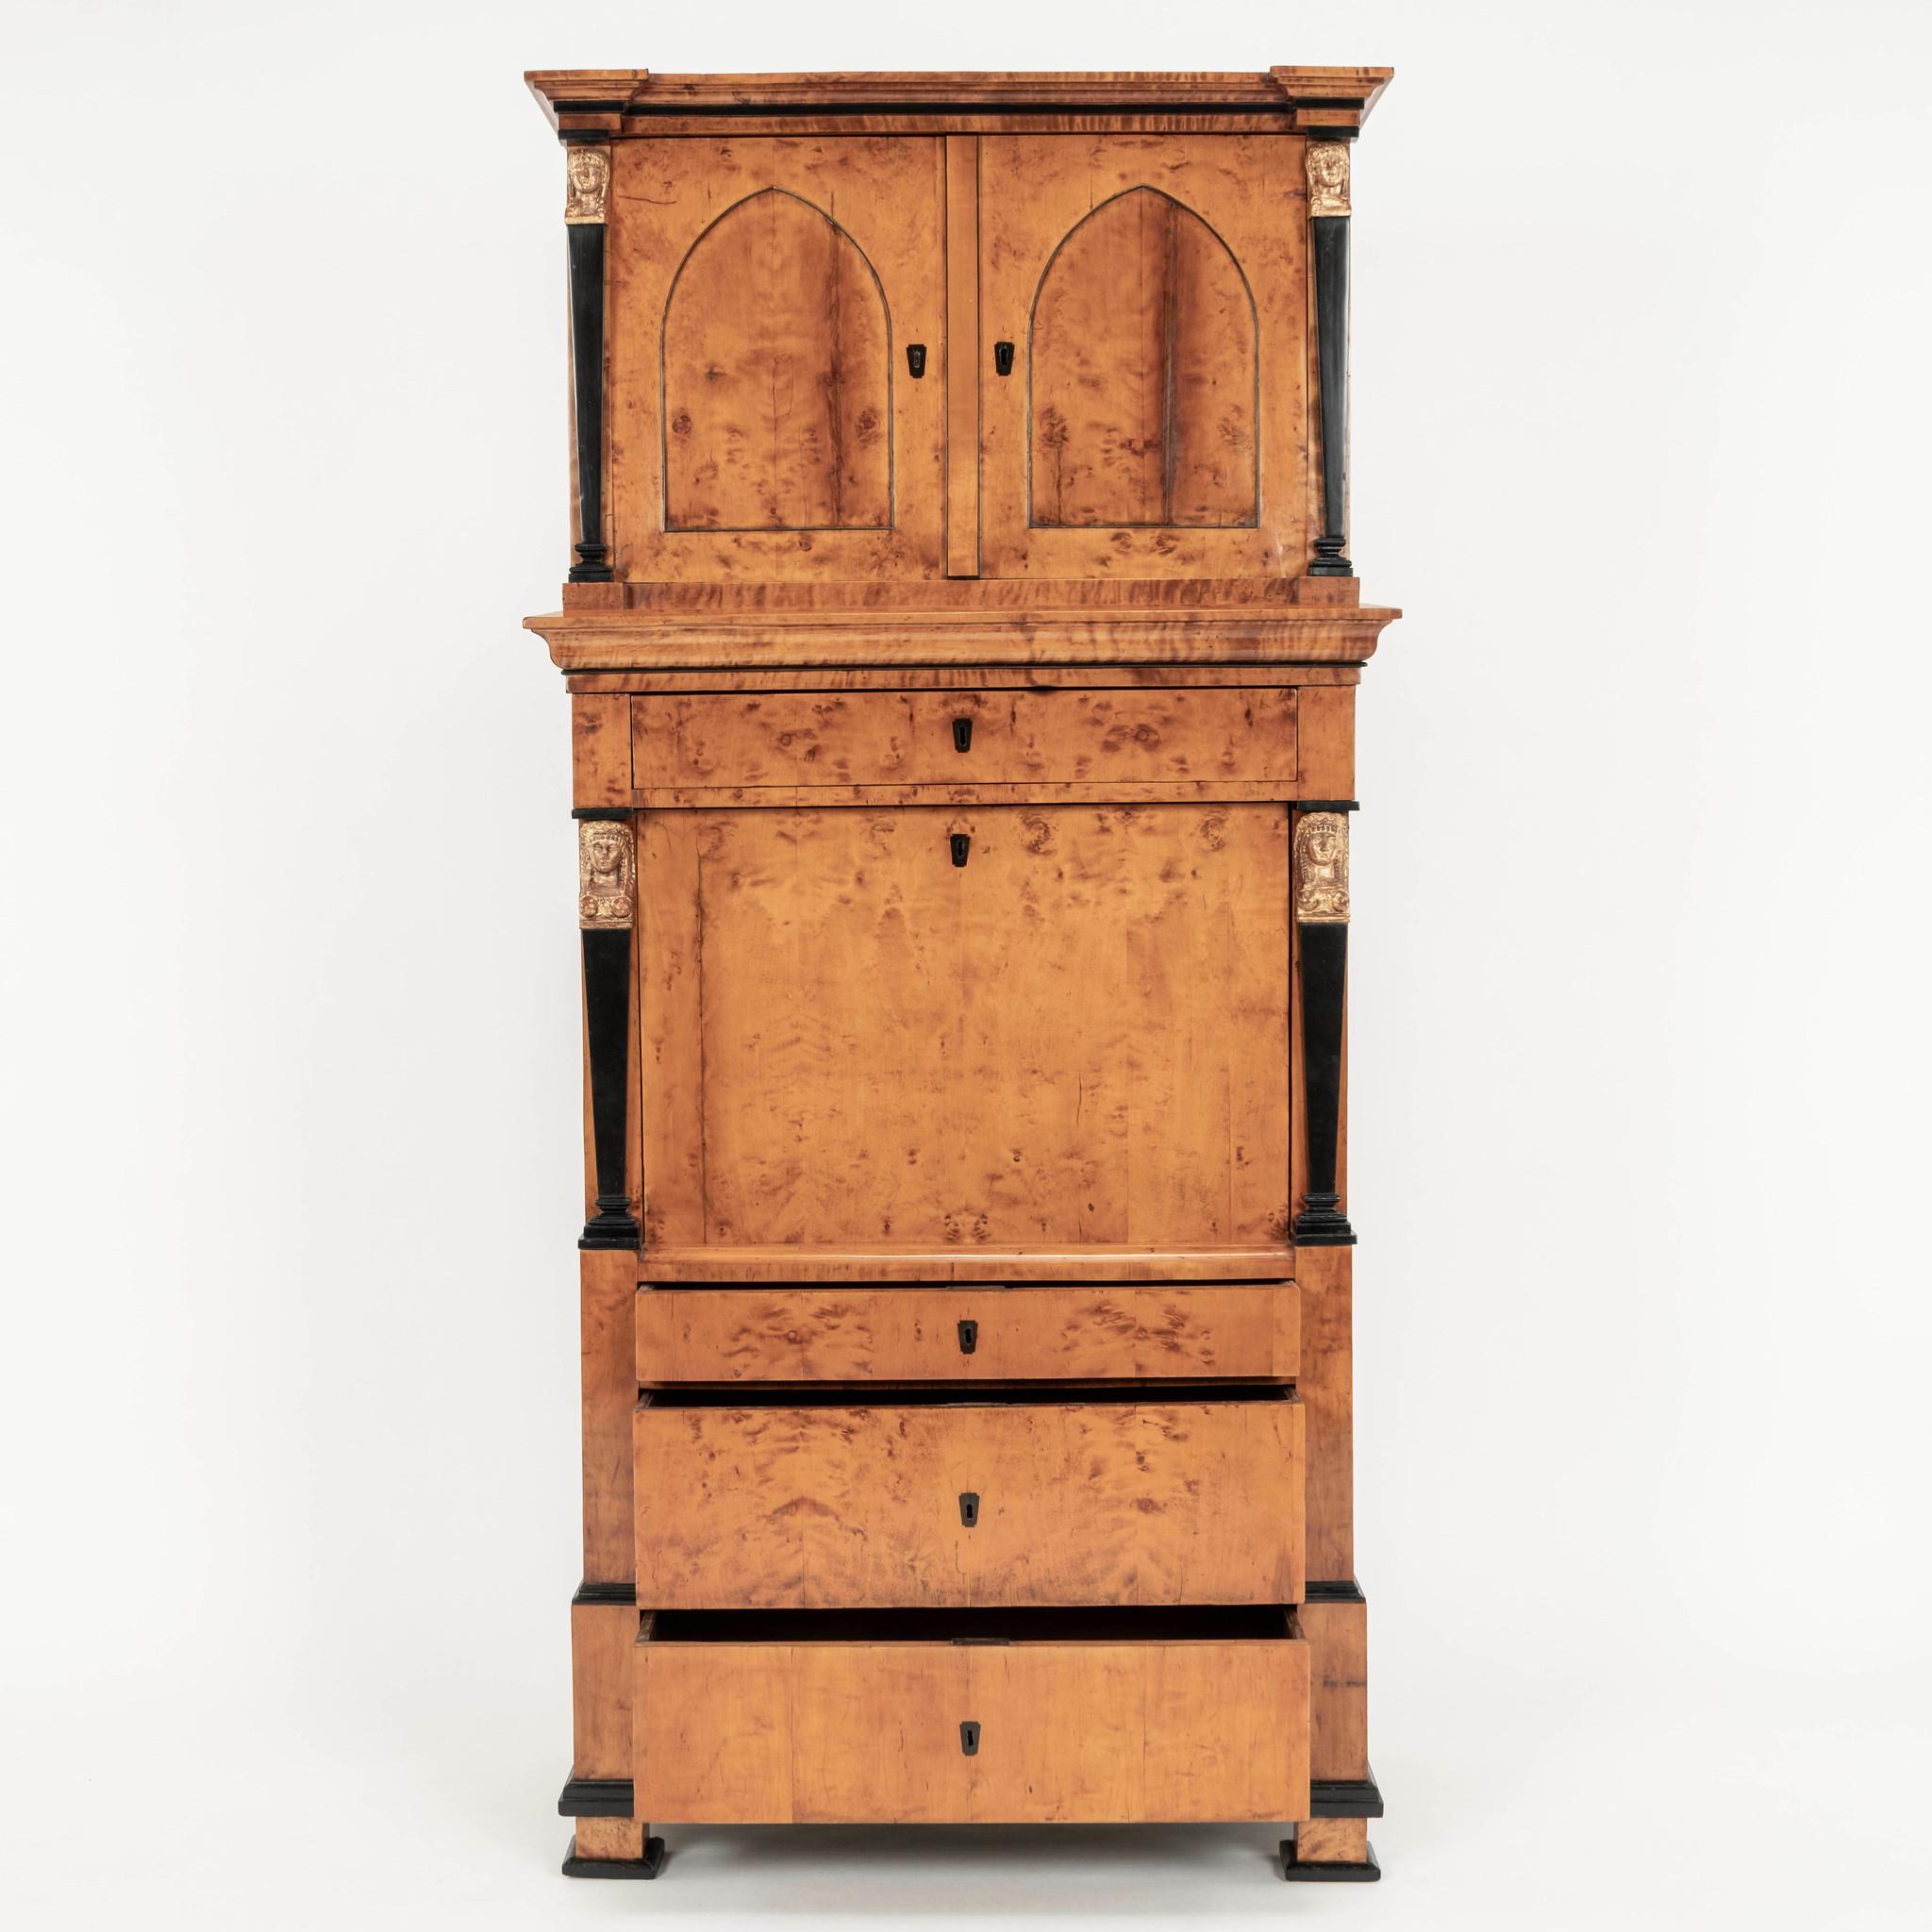 An extraordinary early 19th Century Neoclassical style Karelian birch secretary. This wonderful cabinet features four ebonized columns supporting giltwood caryatids, two gothic arched cabinet doors, a myriad of  compartments, shelves, drawers